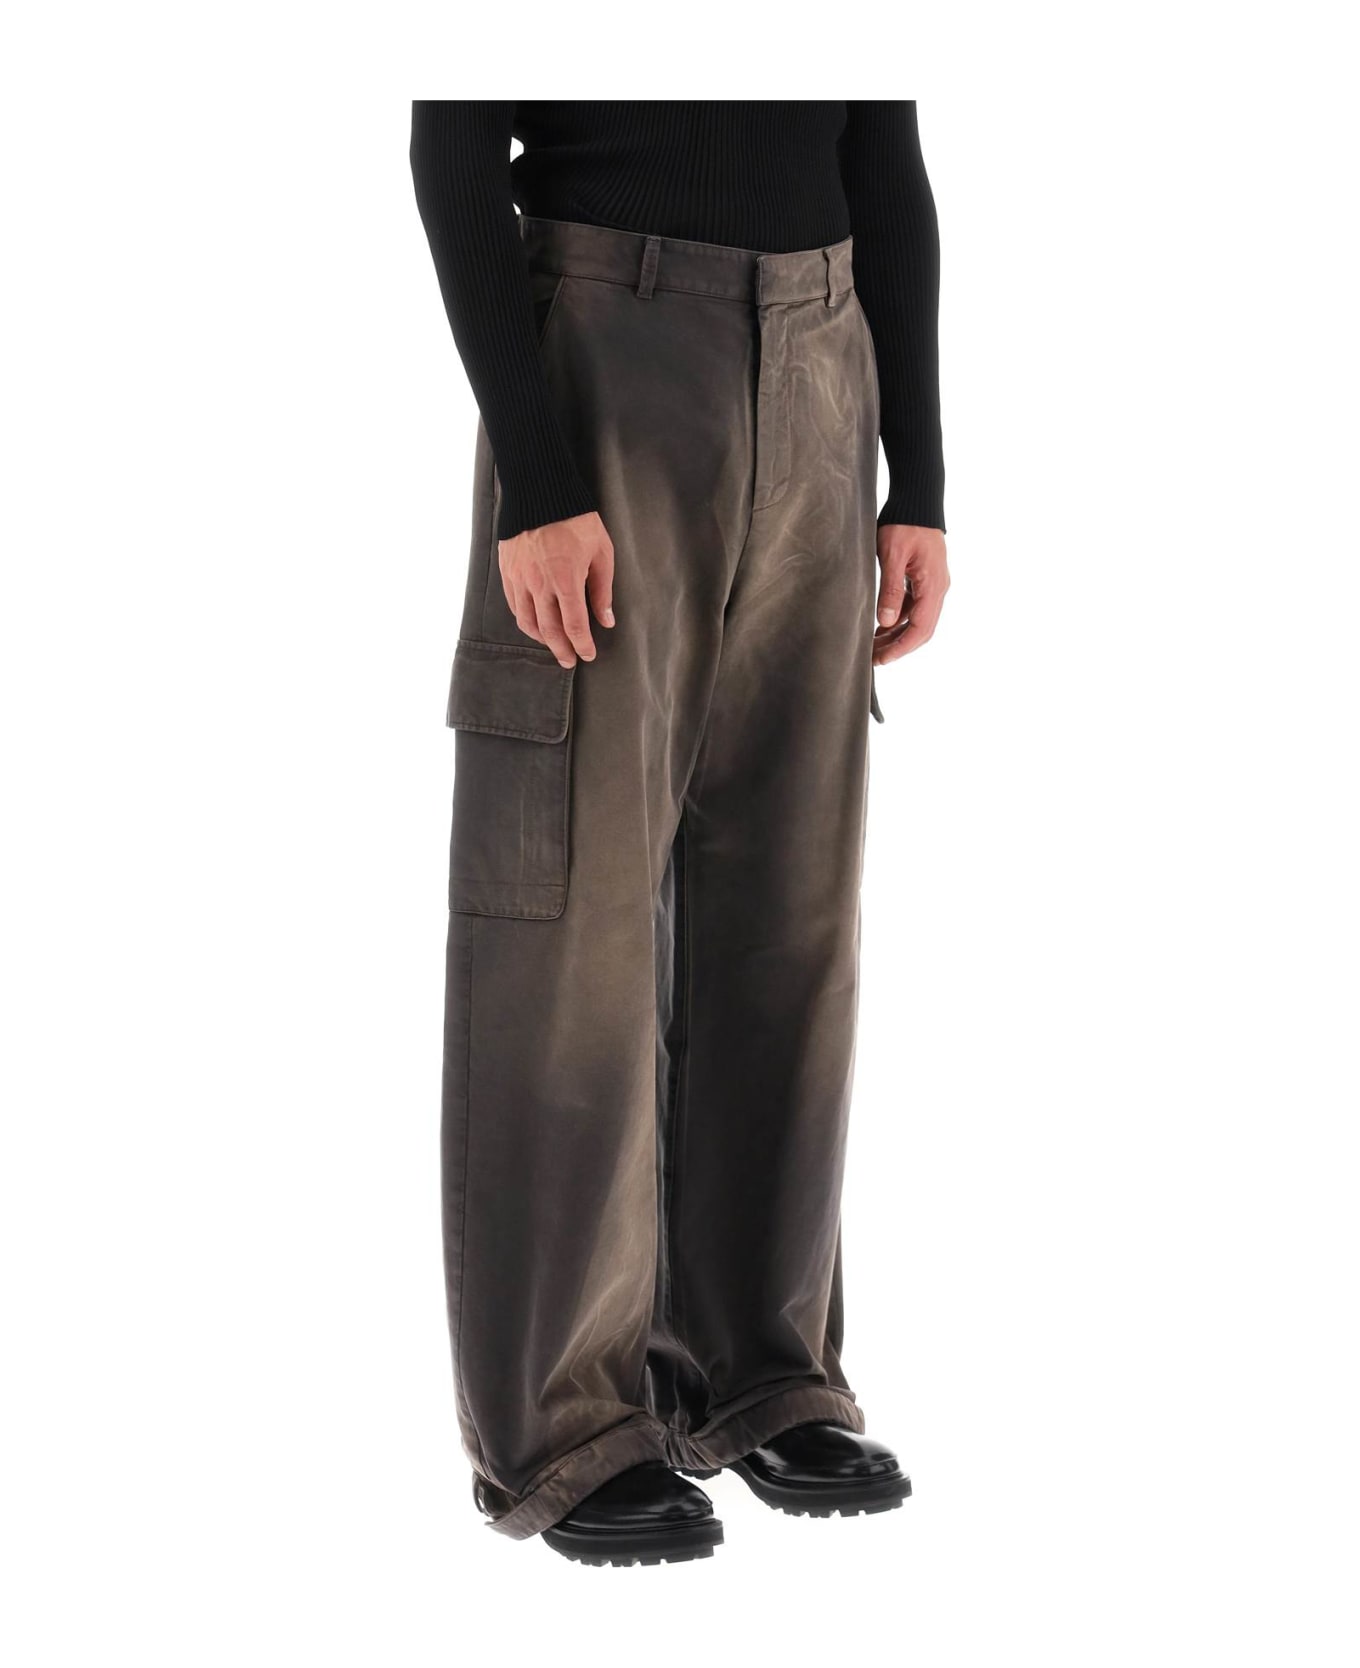 Off-White Cargo Pants - ANTHRACITE (Brown)